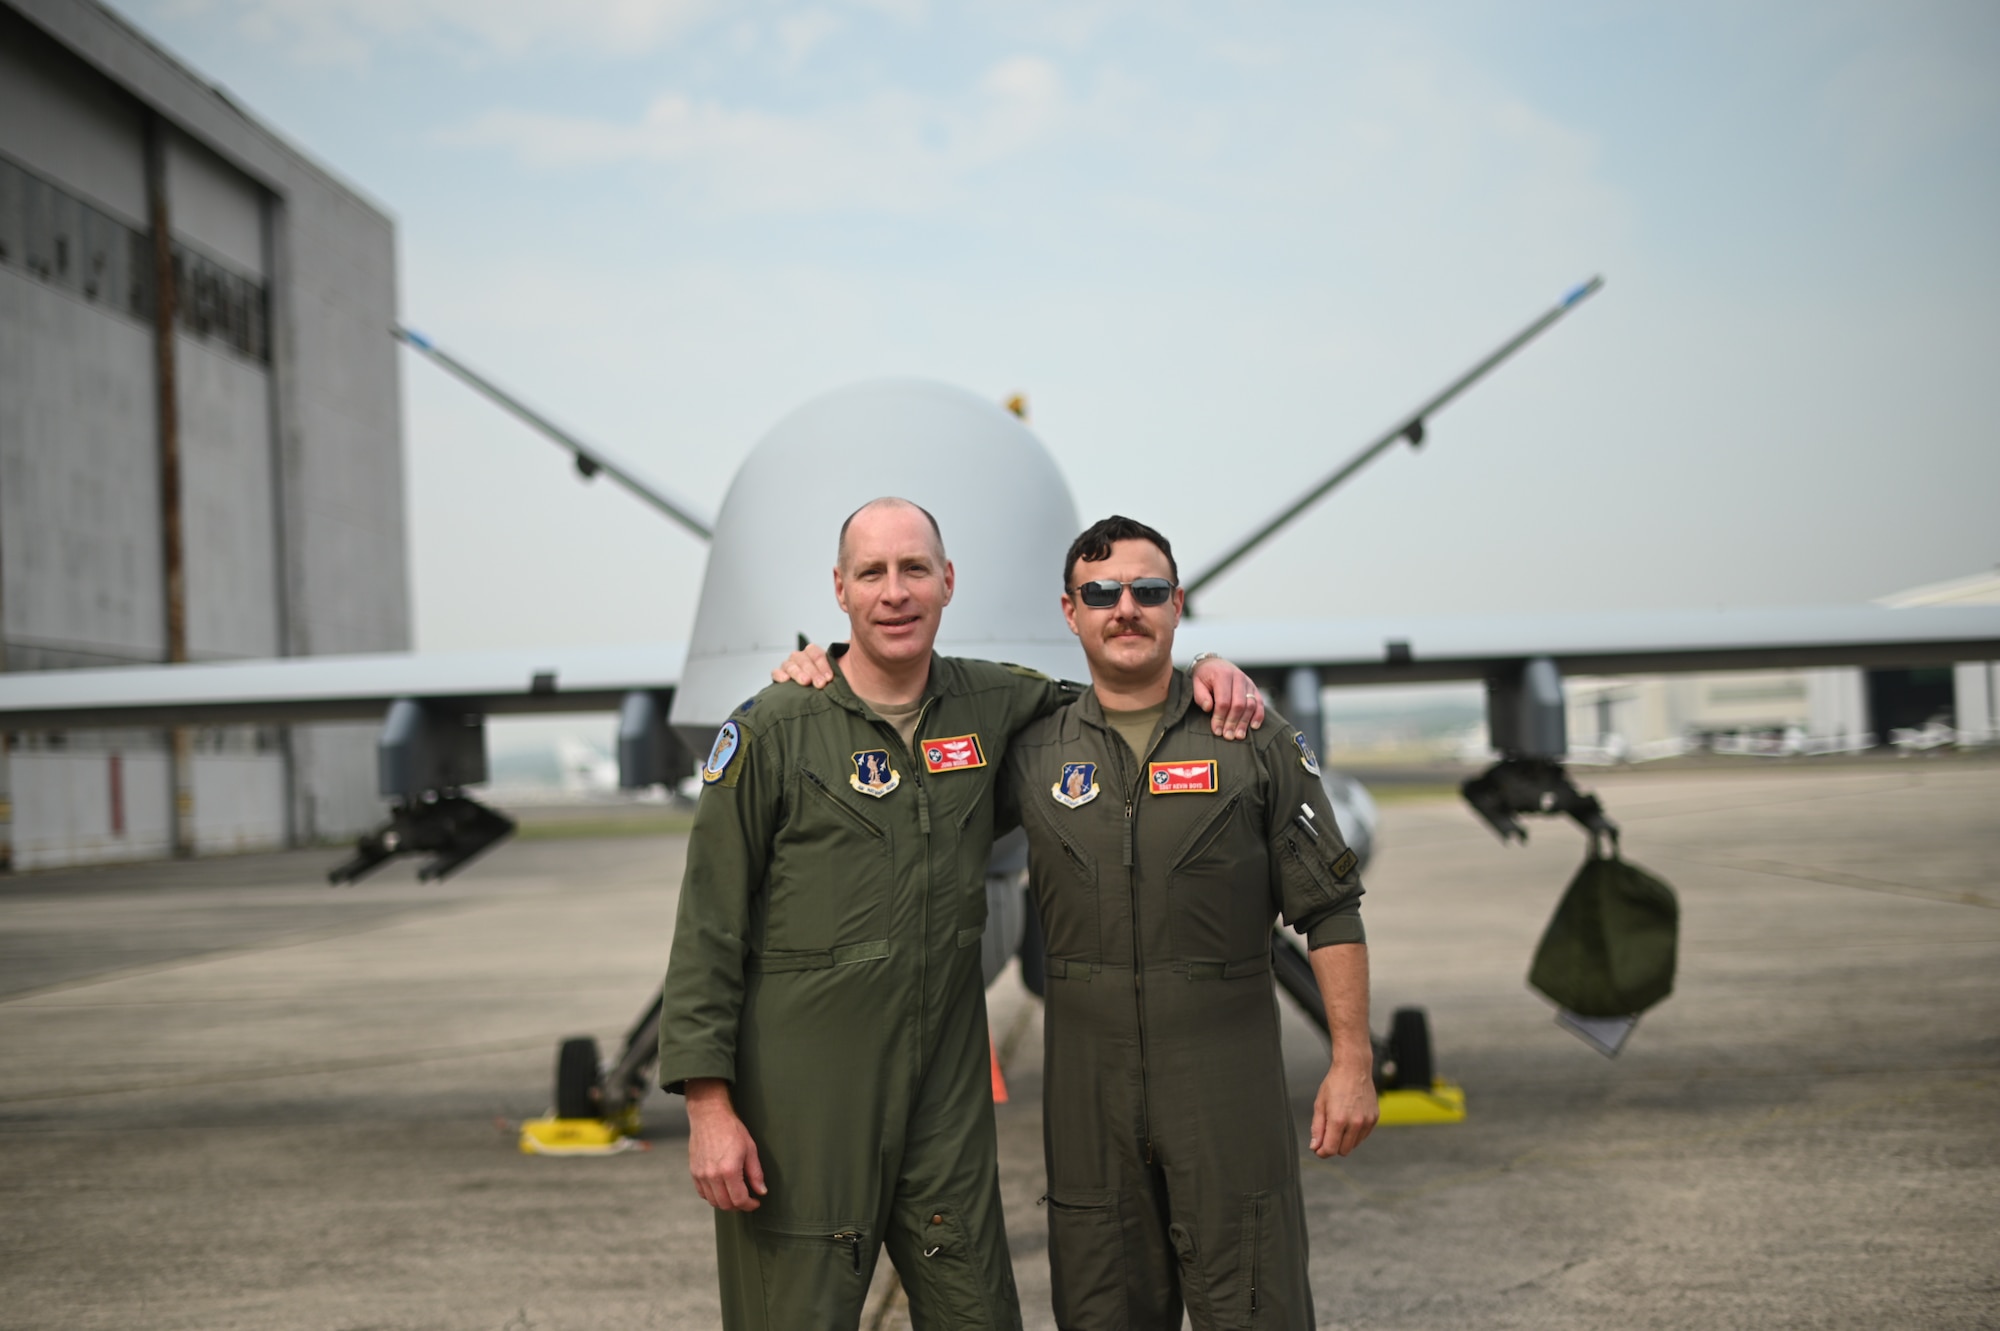 A MQ-9 Reaper lands in Tennessee for the first time in state history June 7, 2023 in Smyrna, Tennessee. The MQ-9, owned by the 163d Attack Wing of the California Air National Guard, is being flown by 118th Wing pilots of the Tennessee Air National Guard for the Whiskey Fury 2023 exercise June 12-16, 2023. (U.S. Air National Guard photo by SrA Yonette Martin)